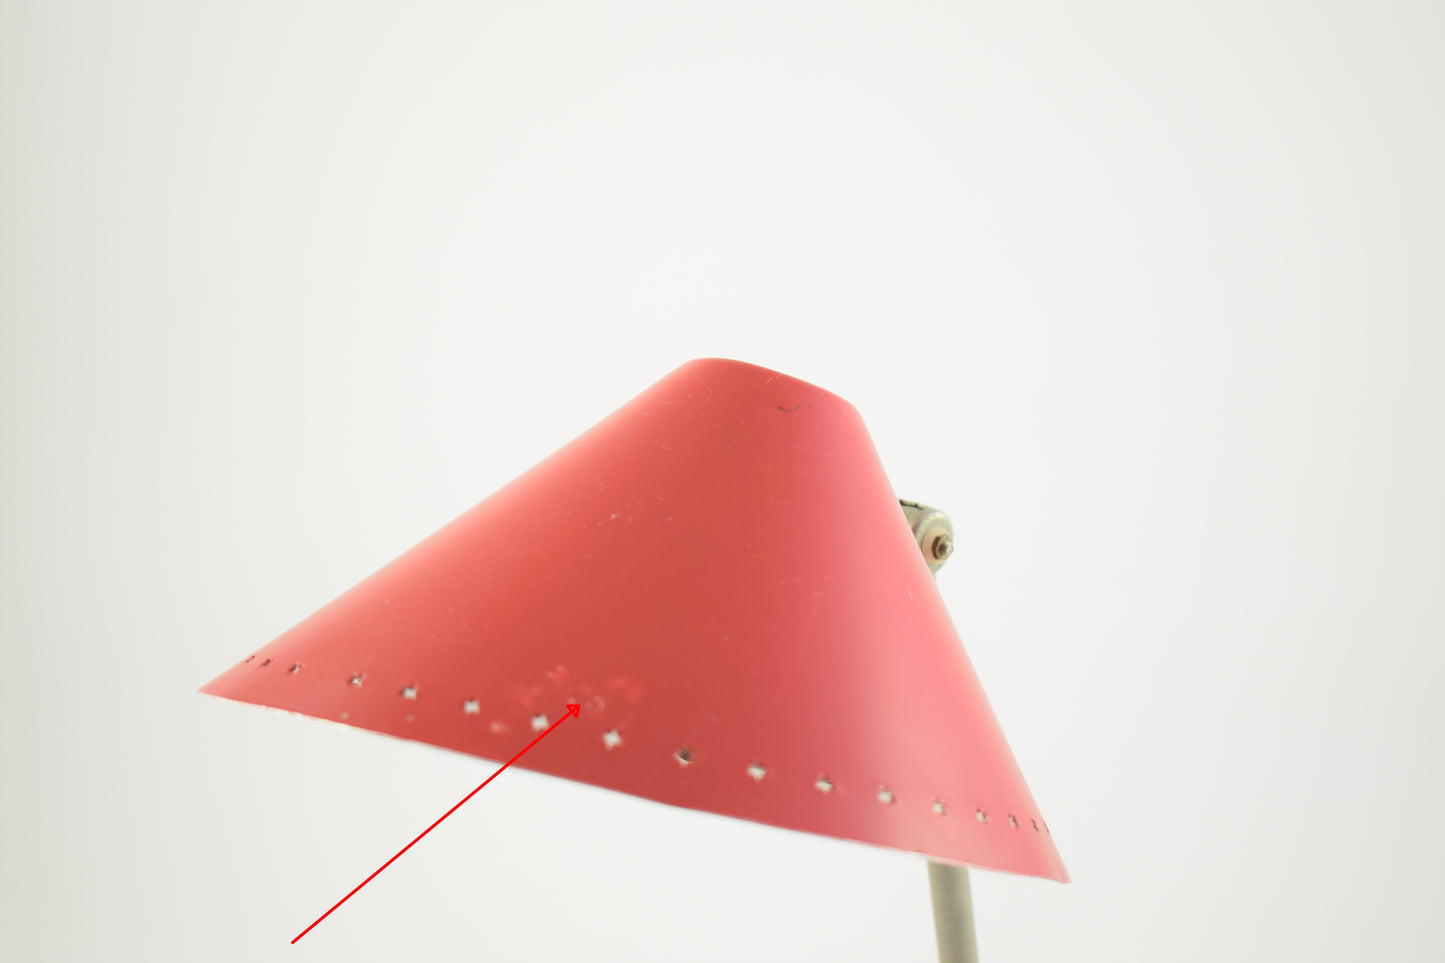 Red Pinocchio wall or table lamp designed in 1956 by H.Th.A. Busquet